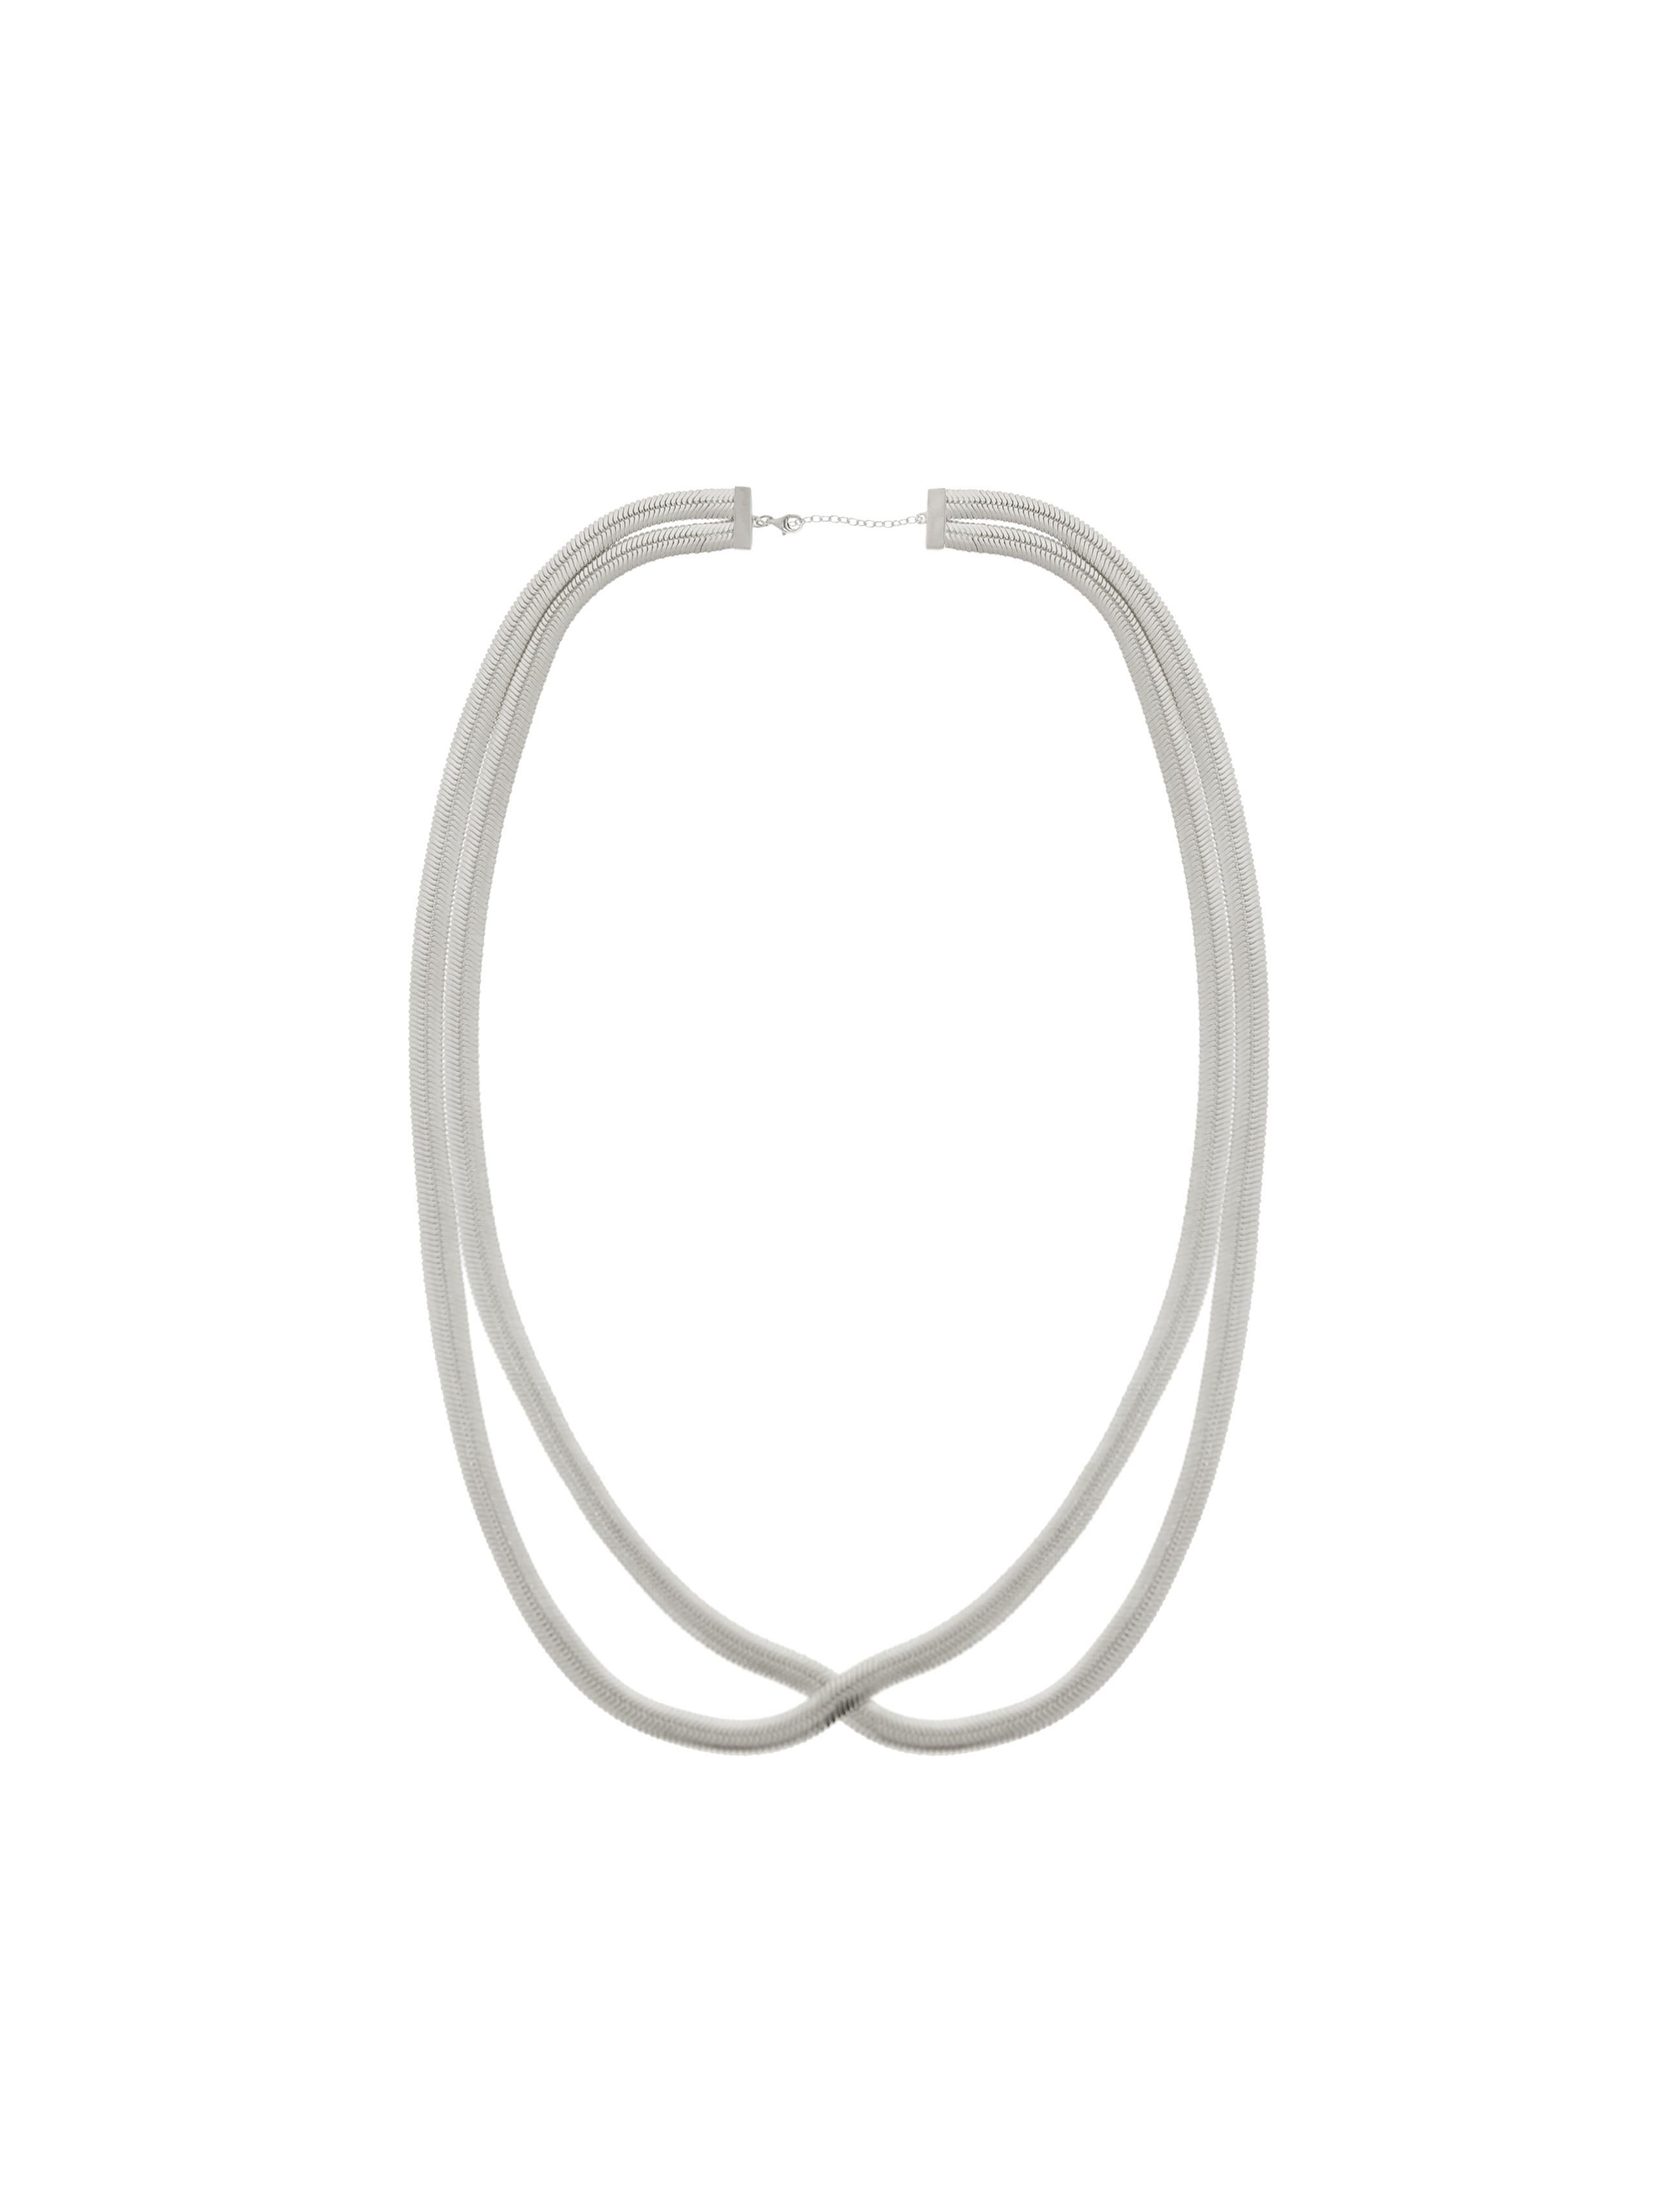 Contemporary Necklace Collar Minimal Snake Chain 18 Karat Gold-Plated Silver Greek For Sale